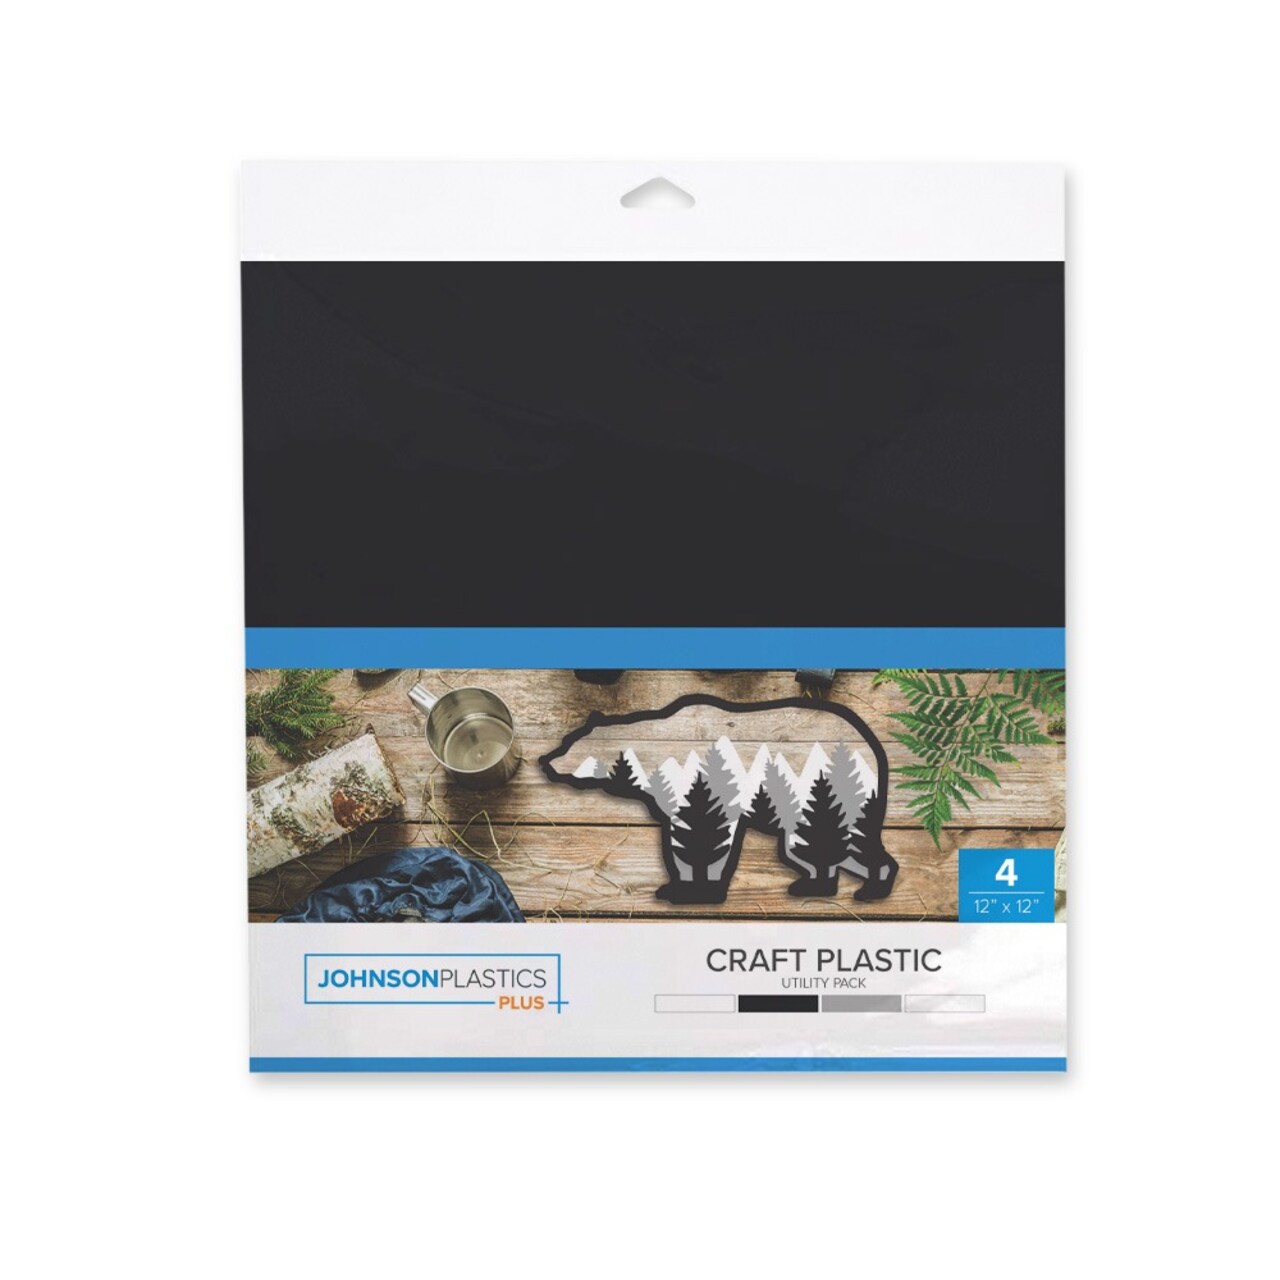 Craft Plastic Sheet Pack, Utility Pack - 4 sheets per pack (White, Black, Clear, Grey)